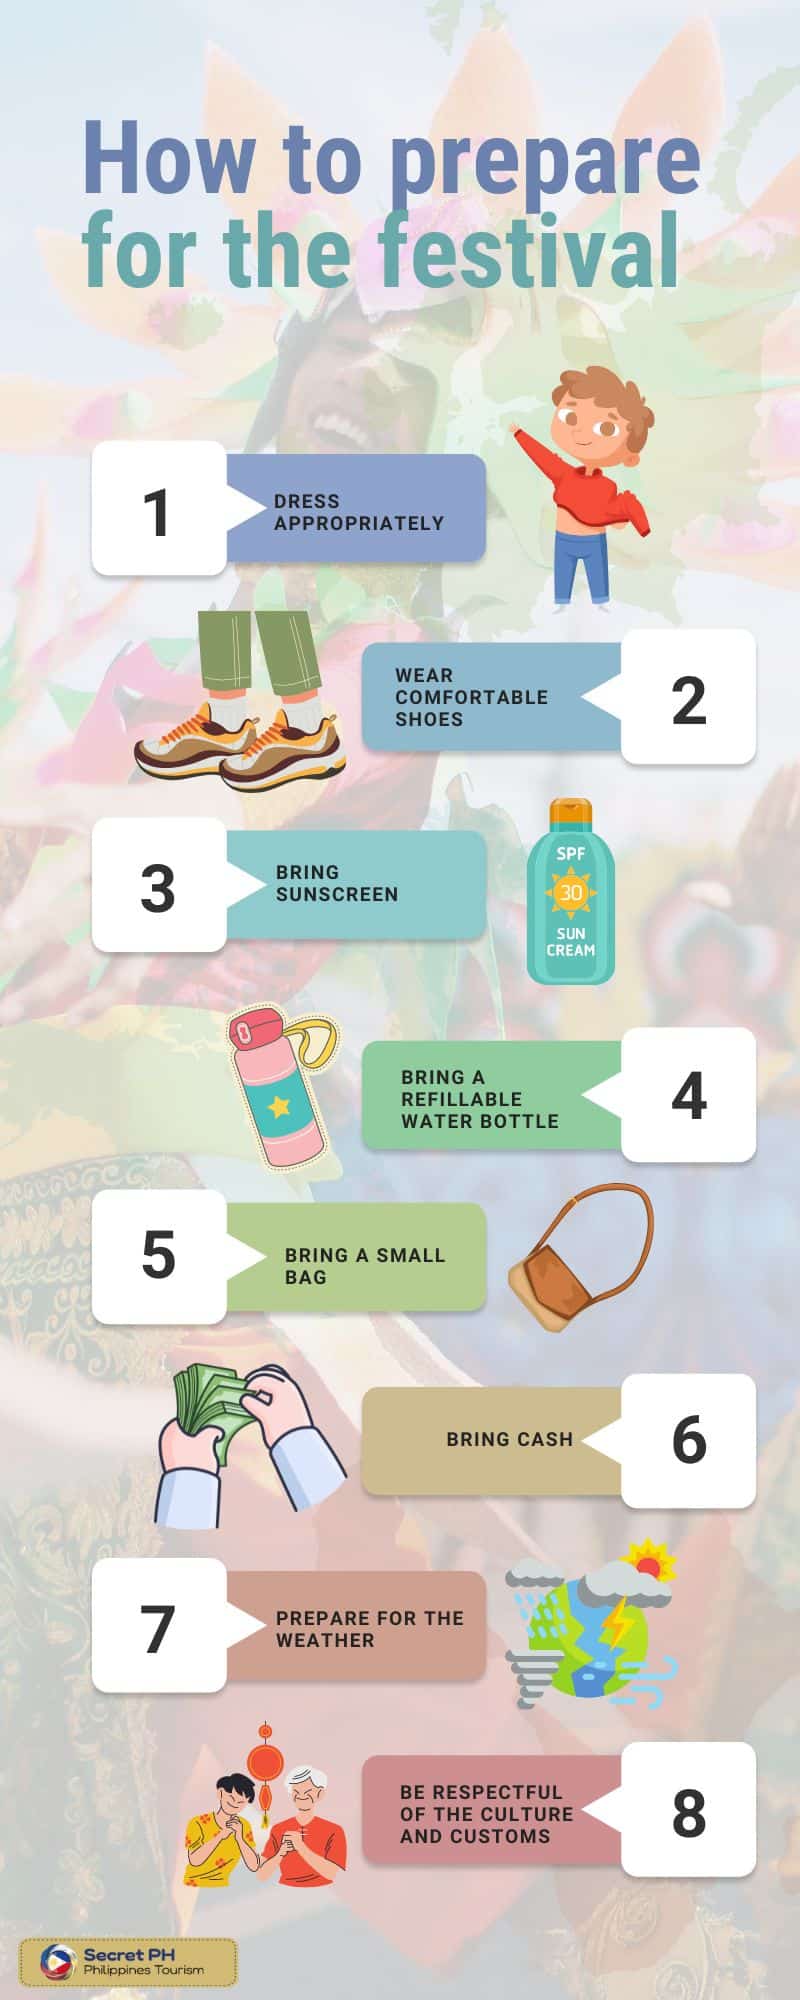 How to prepare for the festival